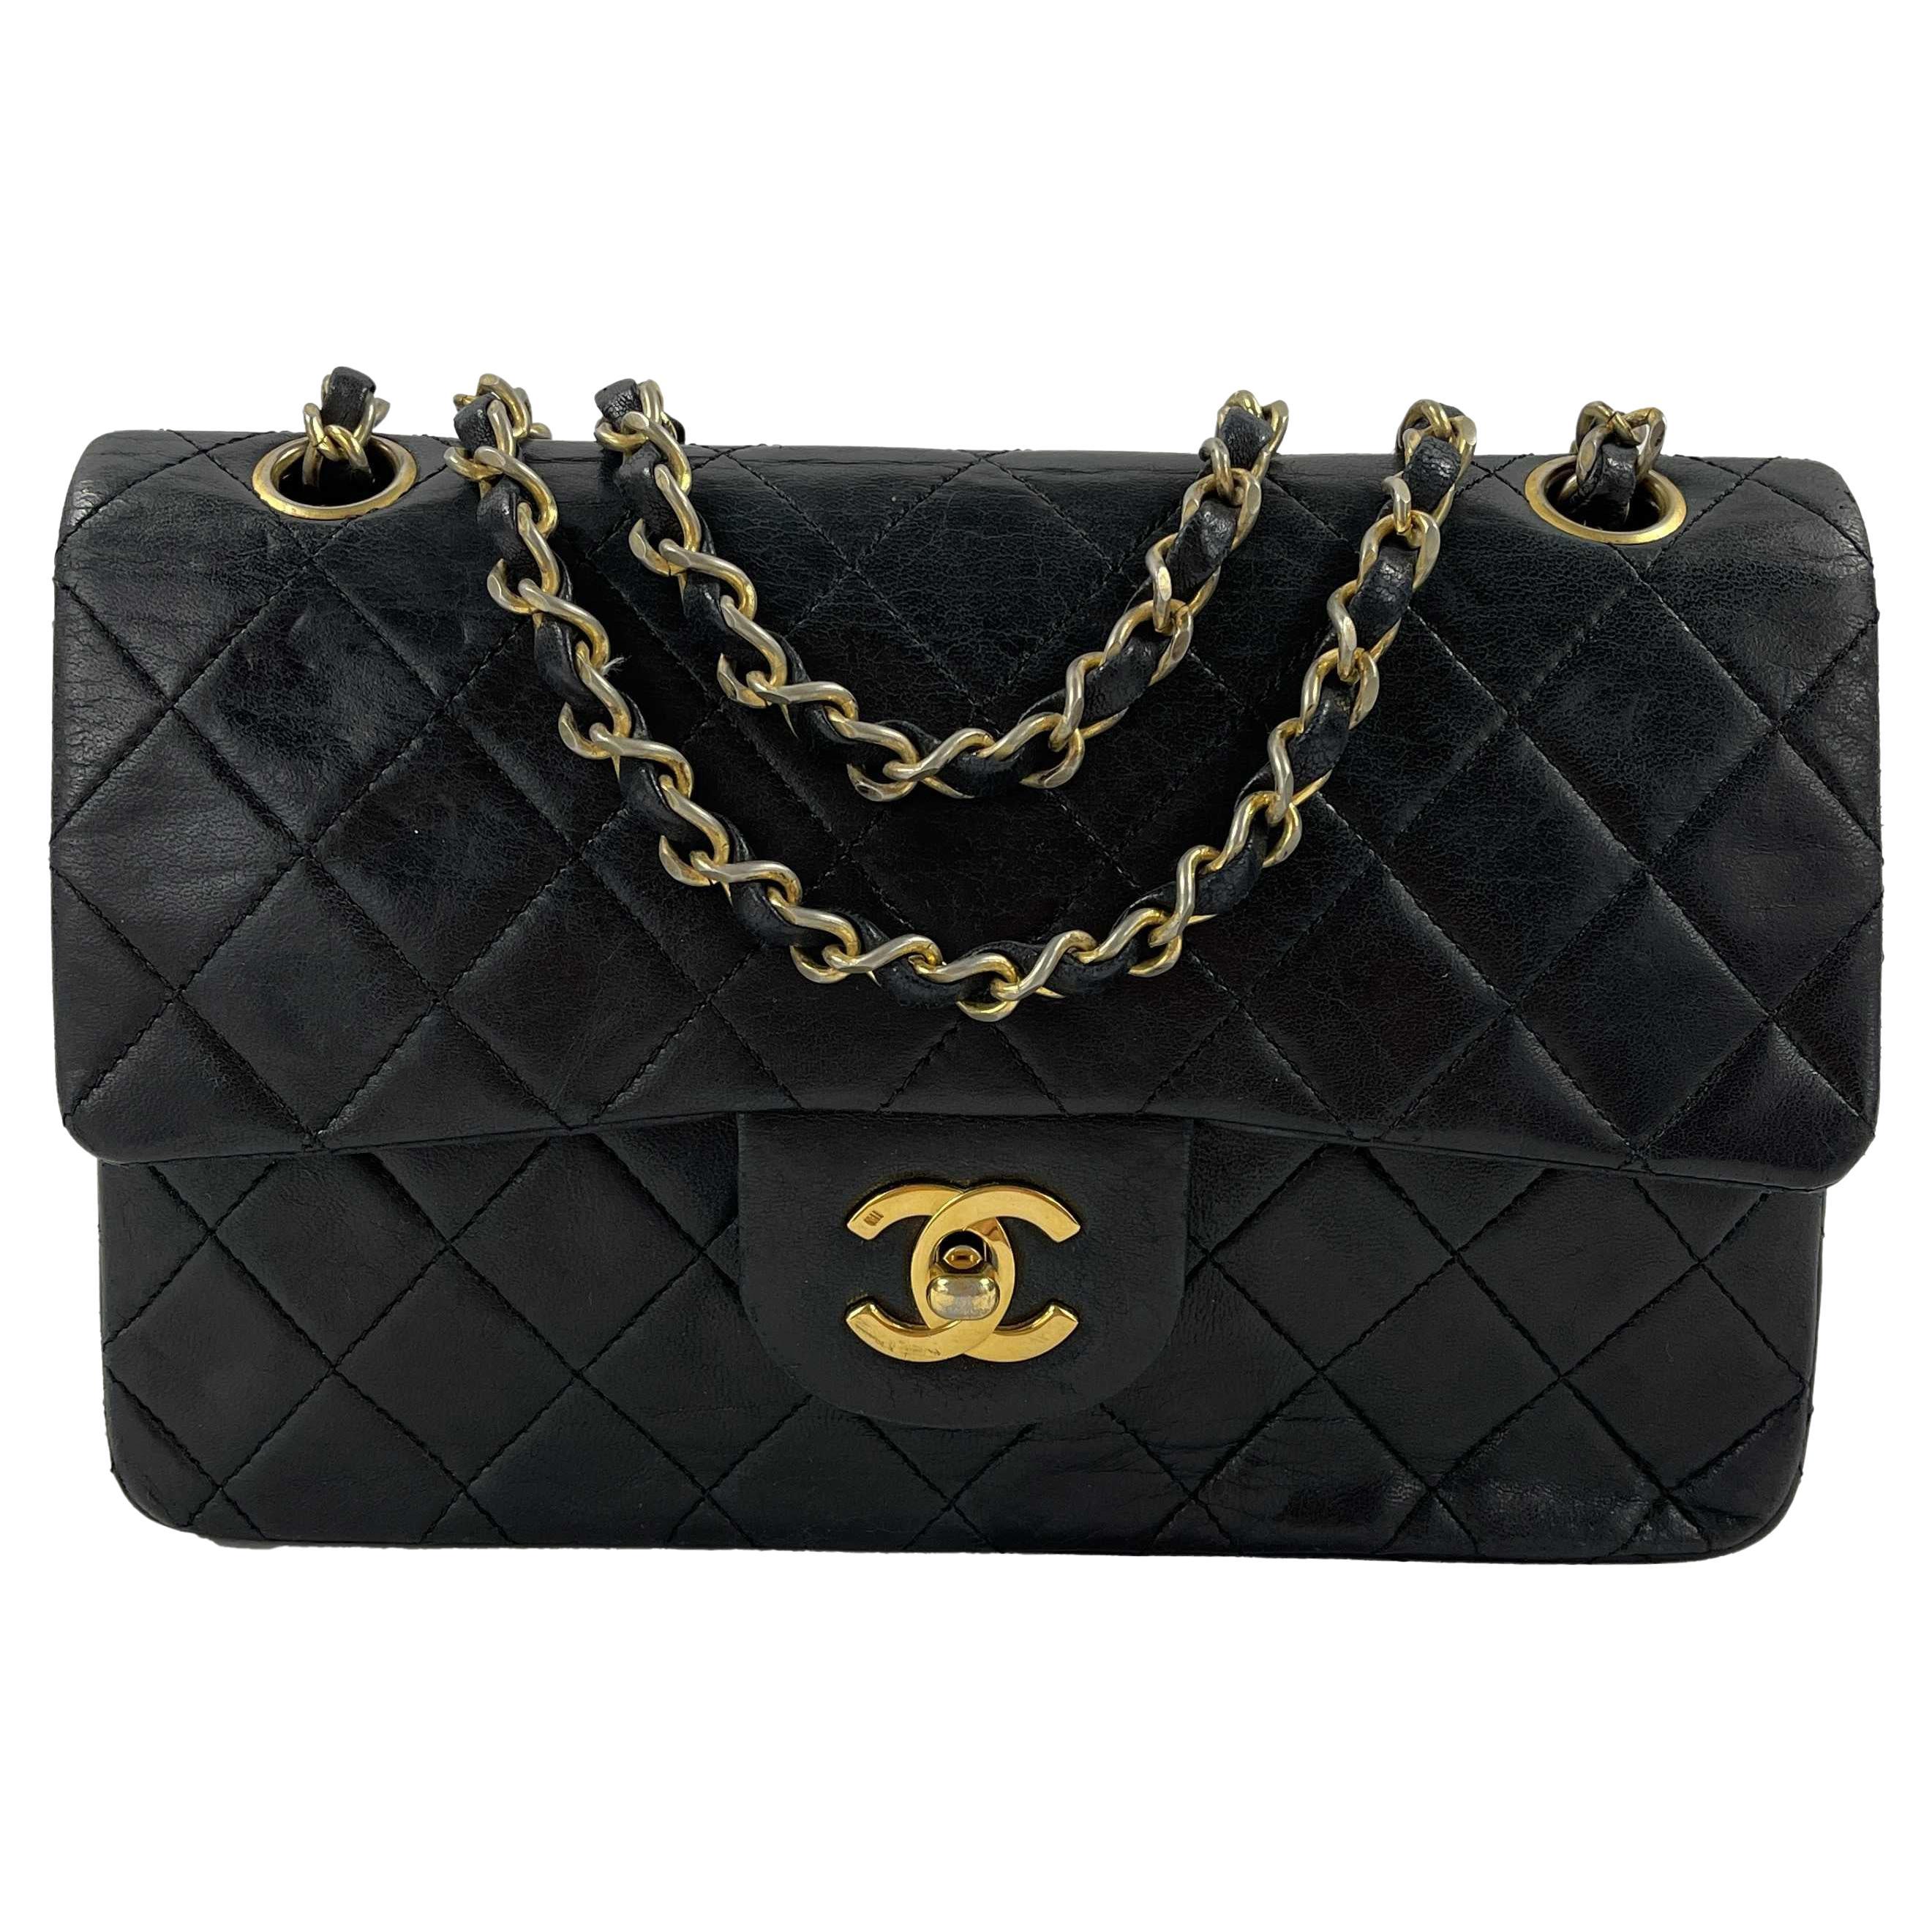 CHANEL 1980s Small Classic Black Quilted Leather Flap Shoulder Bag / Crossbody